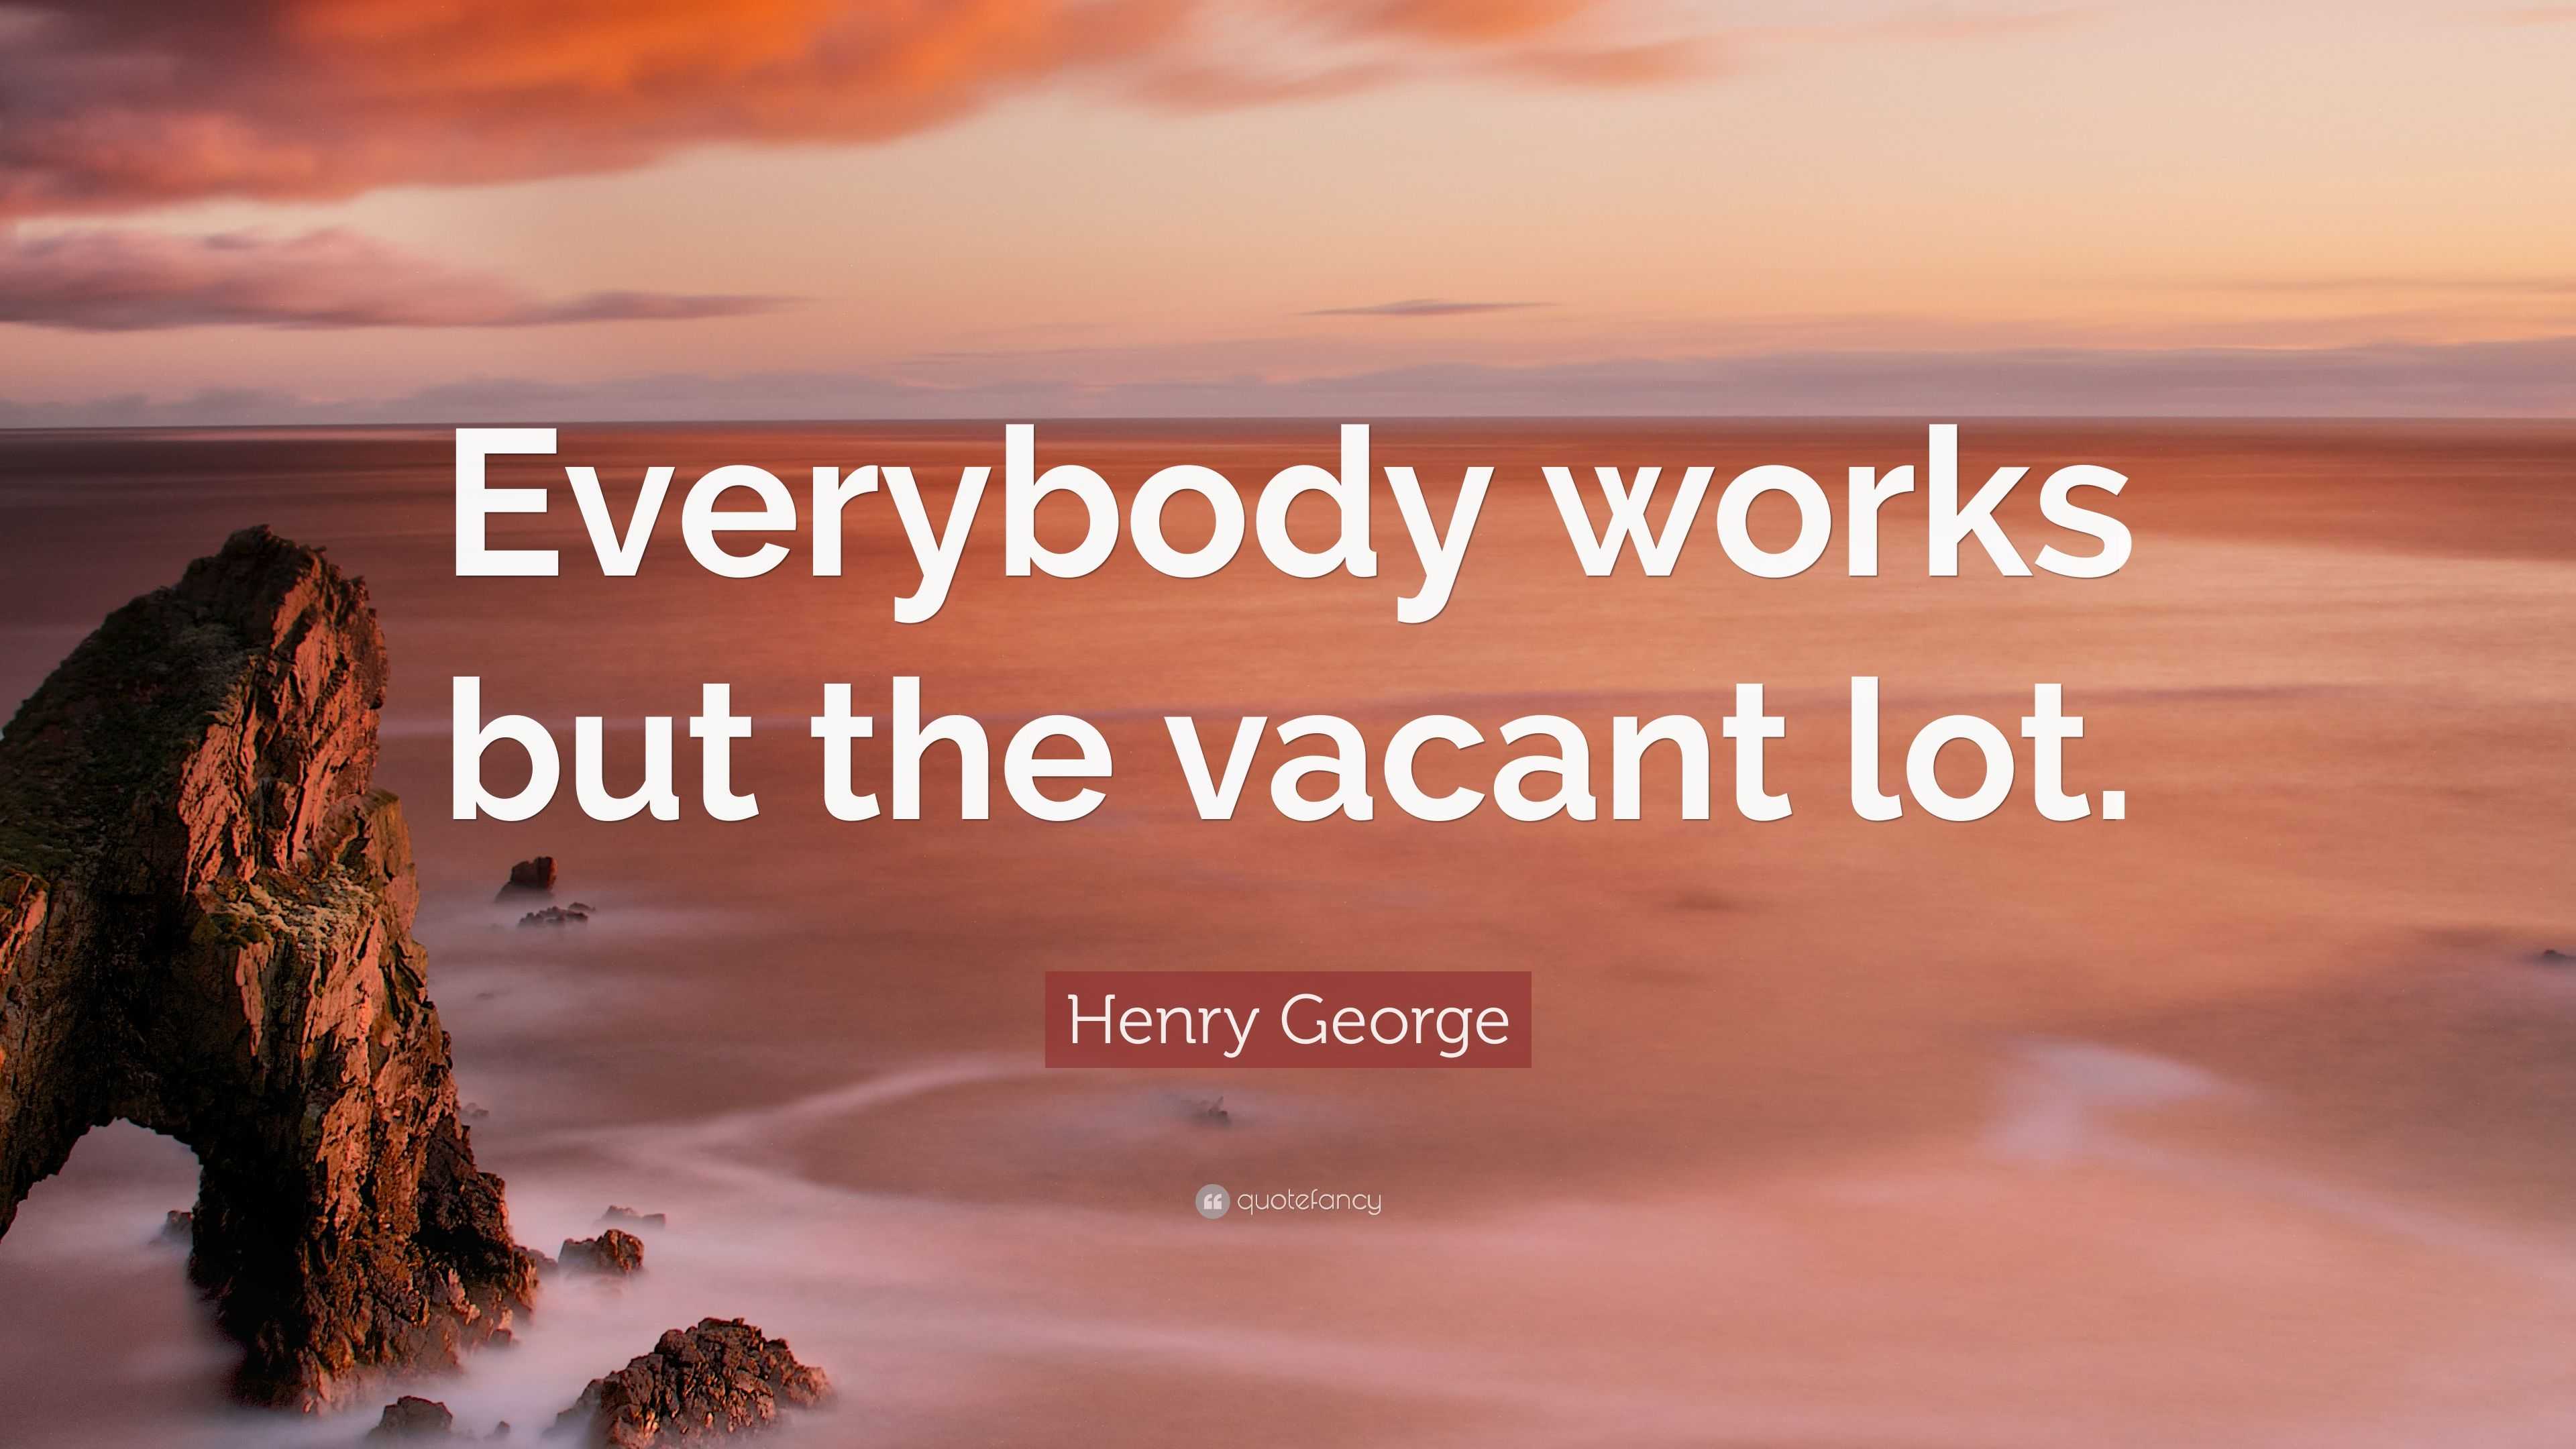 Henry George Quote: "Everybody works but the vacant lot." (7 wallpapers) - Quotefancy